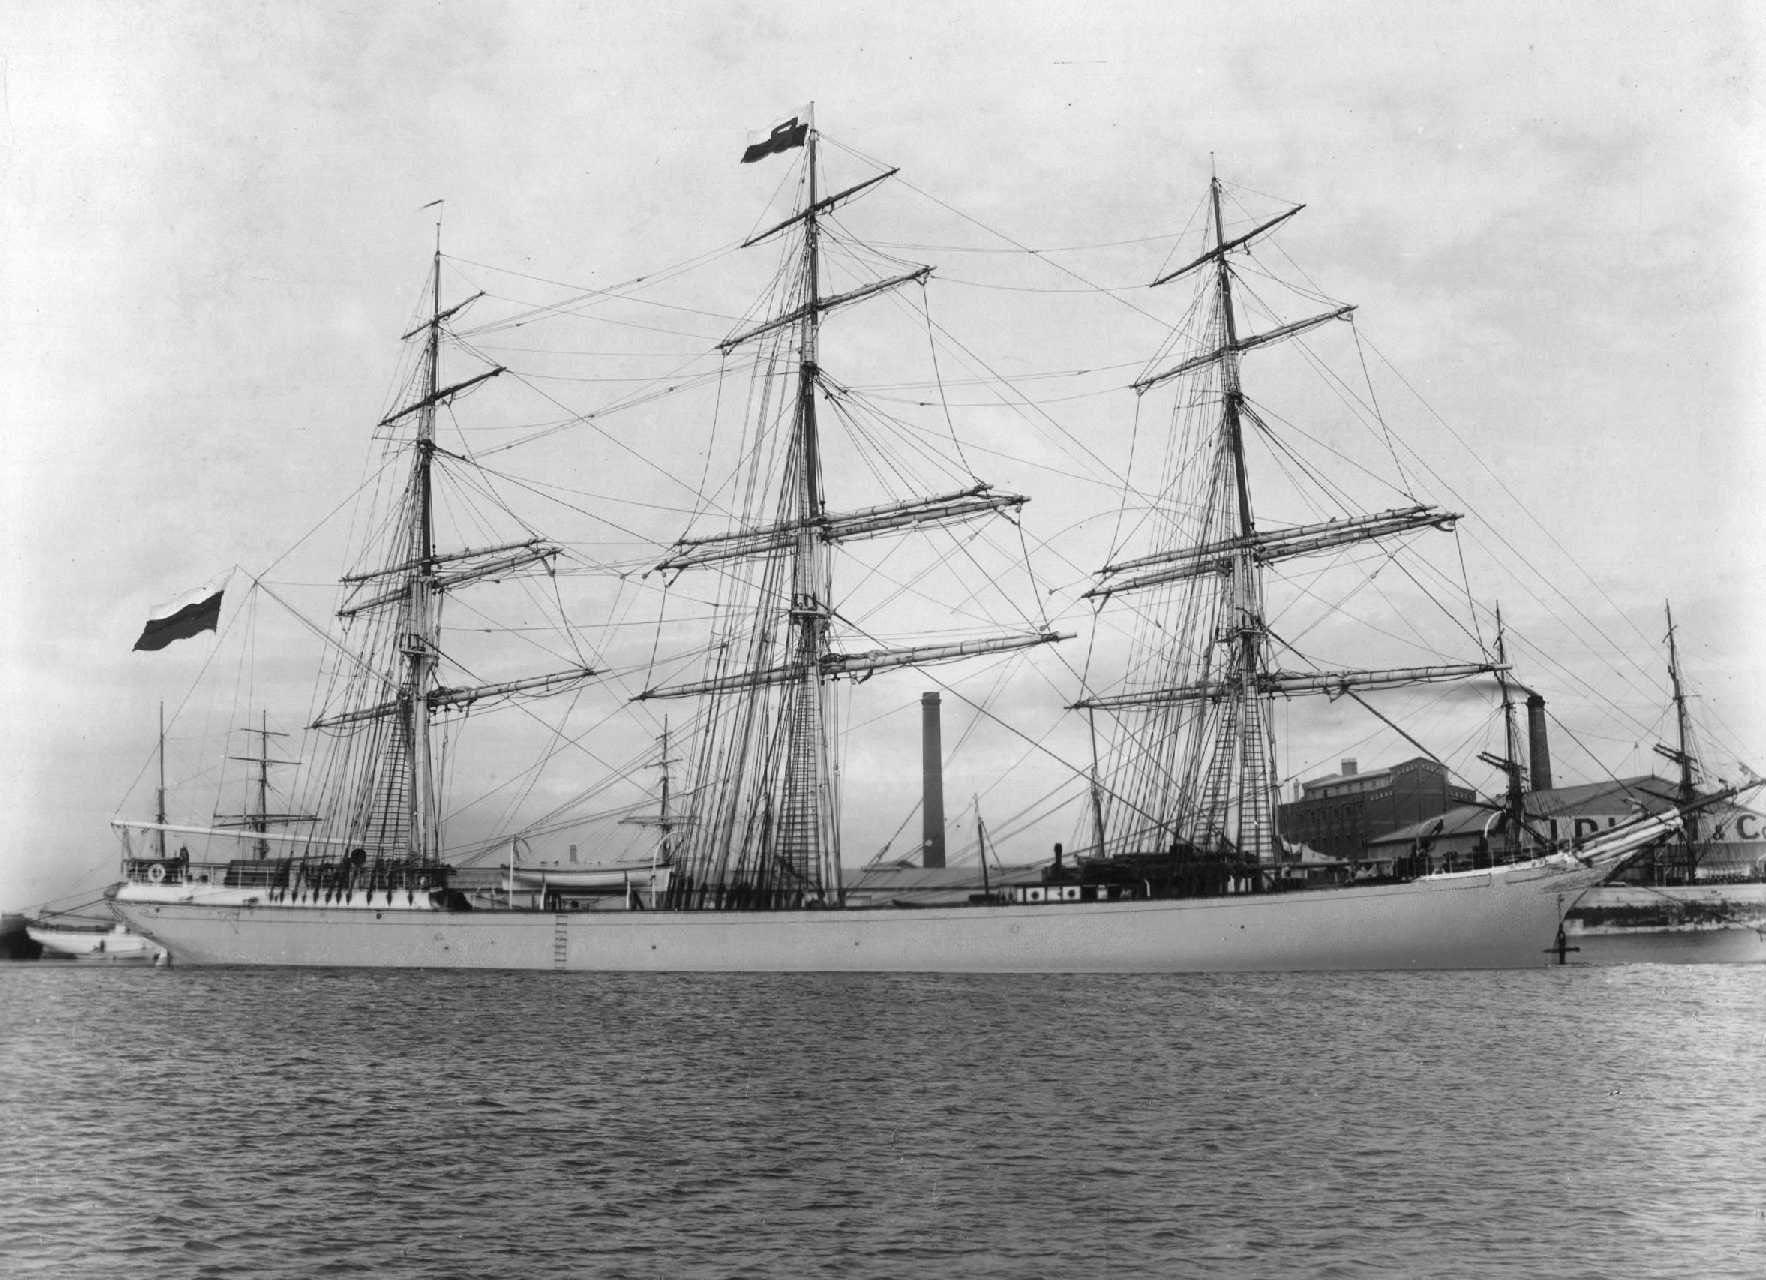 Barque "Yarkand", built at Barrow by Barrow Shipbuilding Co in 1877.  Owned by E Bates & Sons.
Tonnage:  1352 gross
Official Number:  76483
Dimensions:  length 222', breadth 37', draught 22'
Port Of Registry:  Liverpool